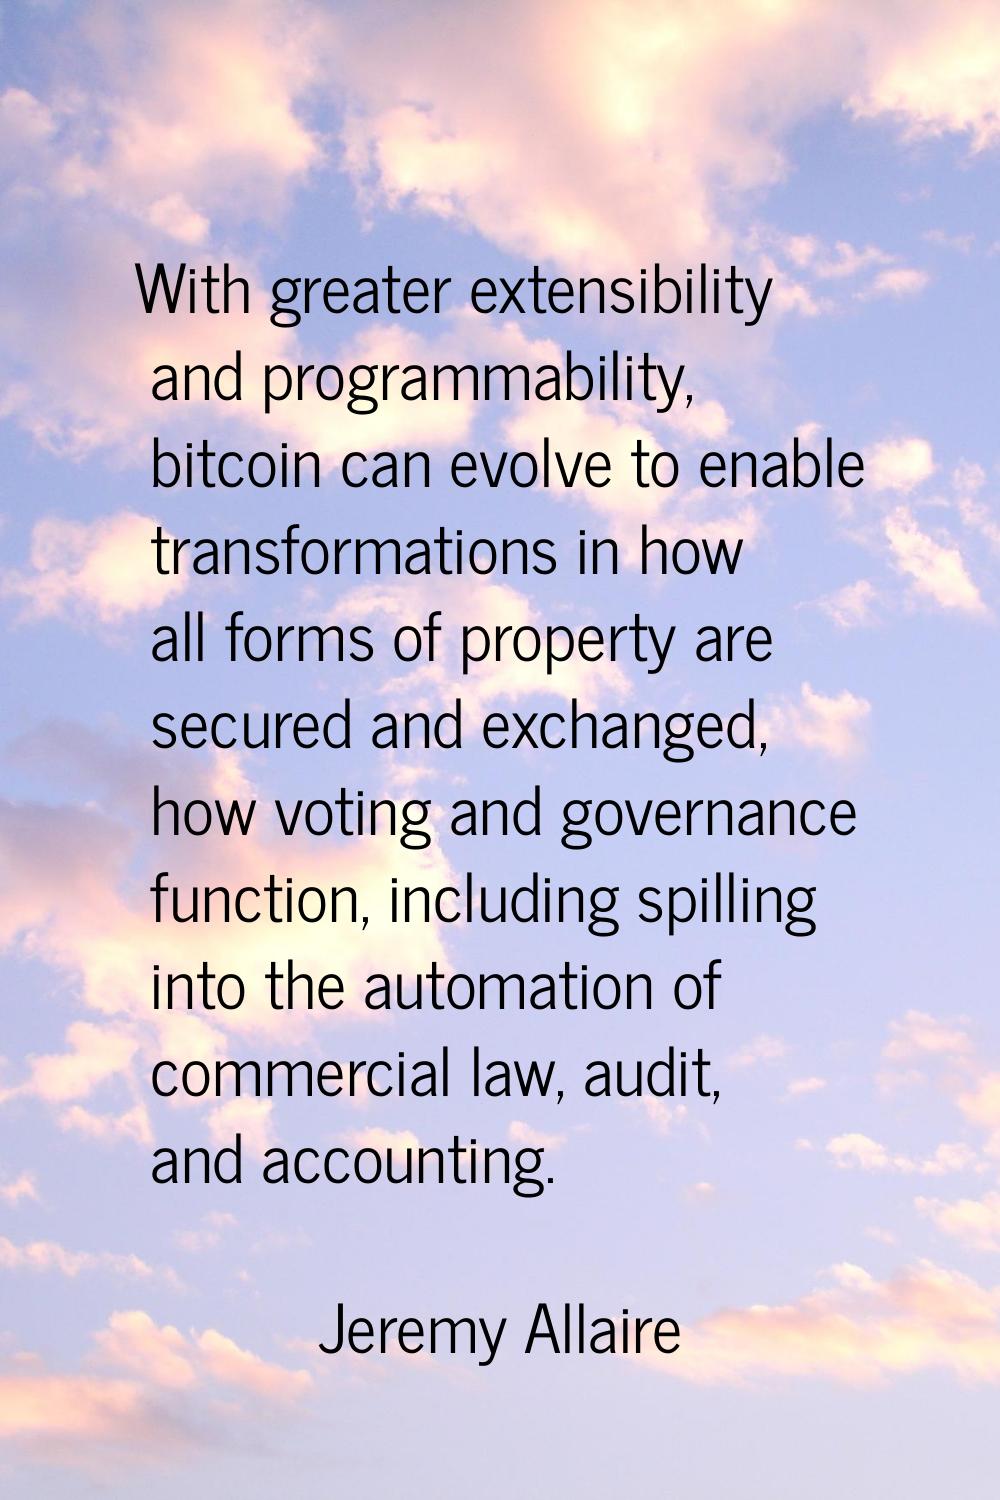 With greater extensibility and programmability, bitcoin can evolve to enable transformations in how